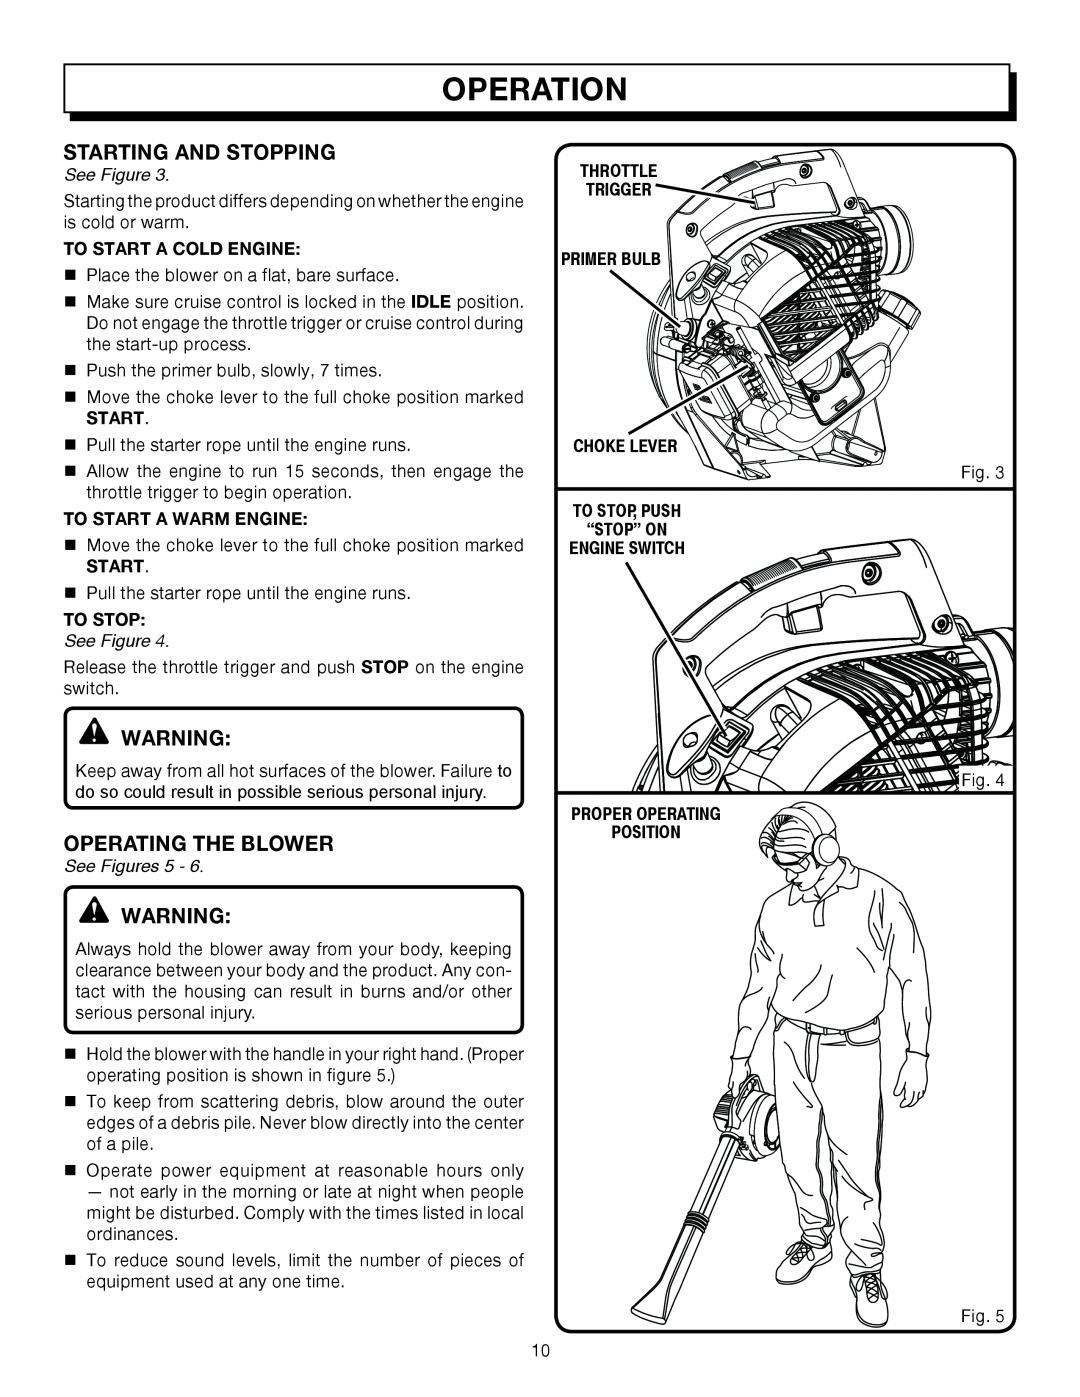 Homelite UT08512B manual Operation, To Start A Cold Engine, To Start A Warm Engine, To Stop, See Figures 